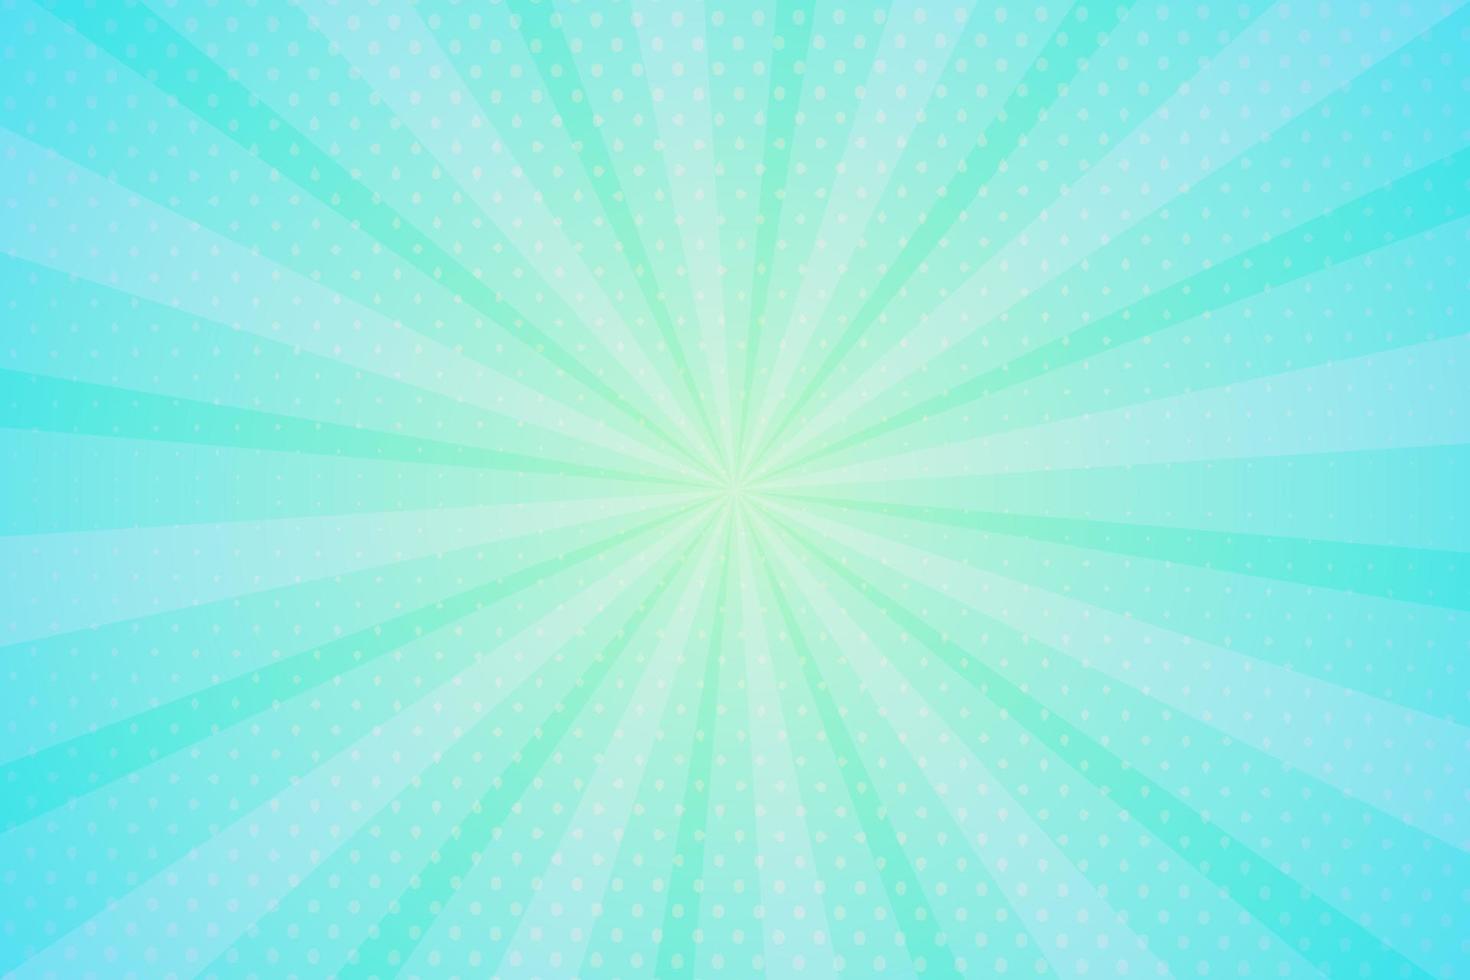 Green light burst abstract background design with dotted, vector illustration